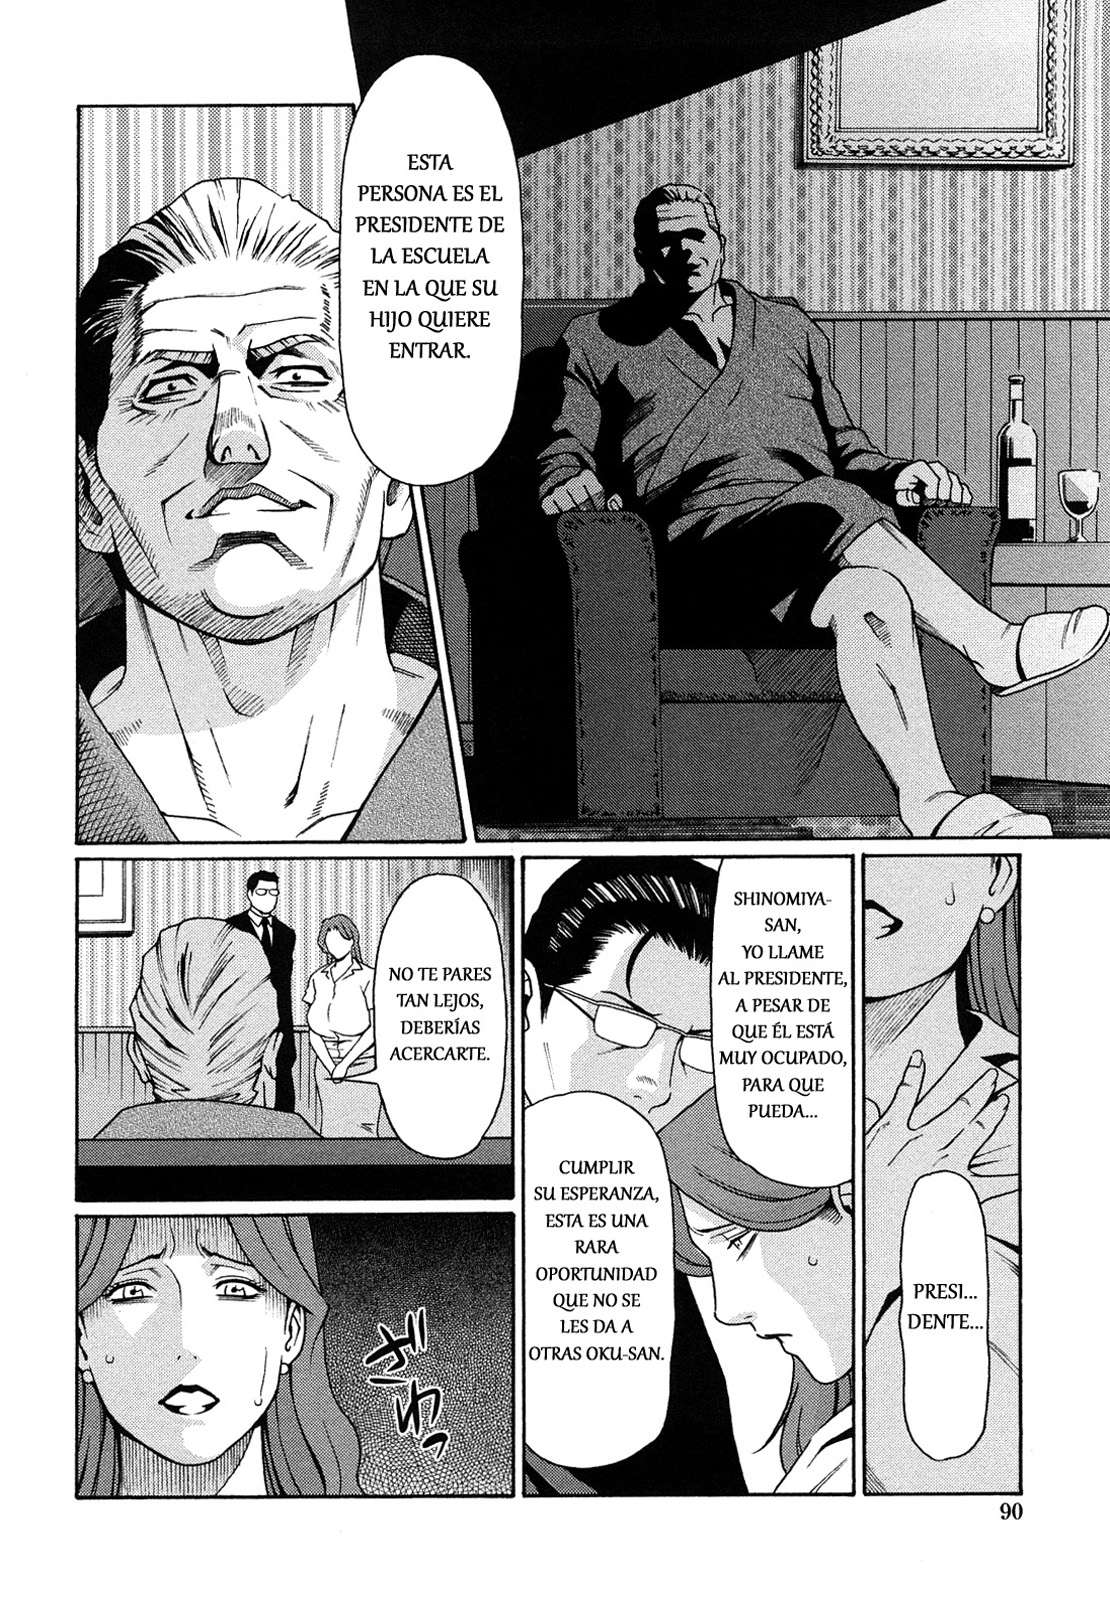 Immorality Love-Hole Completo (Sin Censura) Chapter-6 - 7